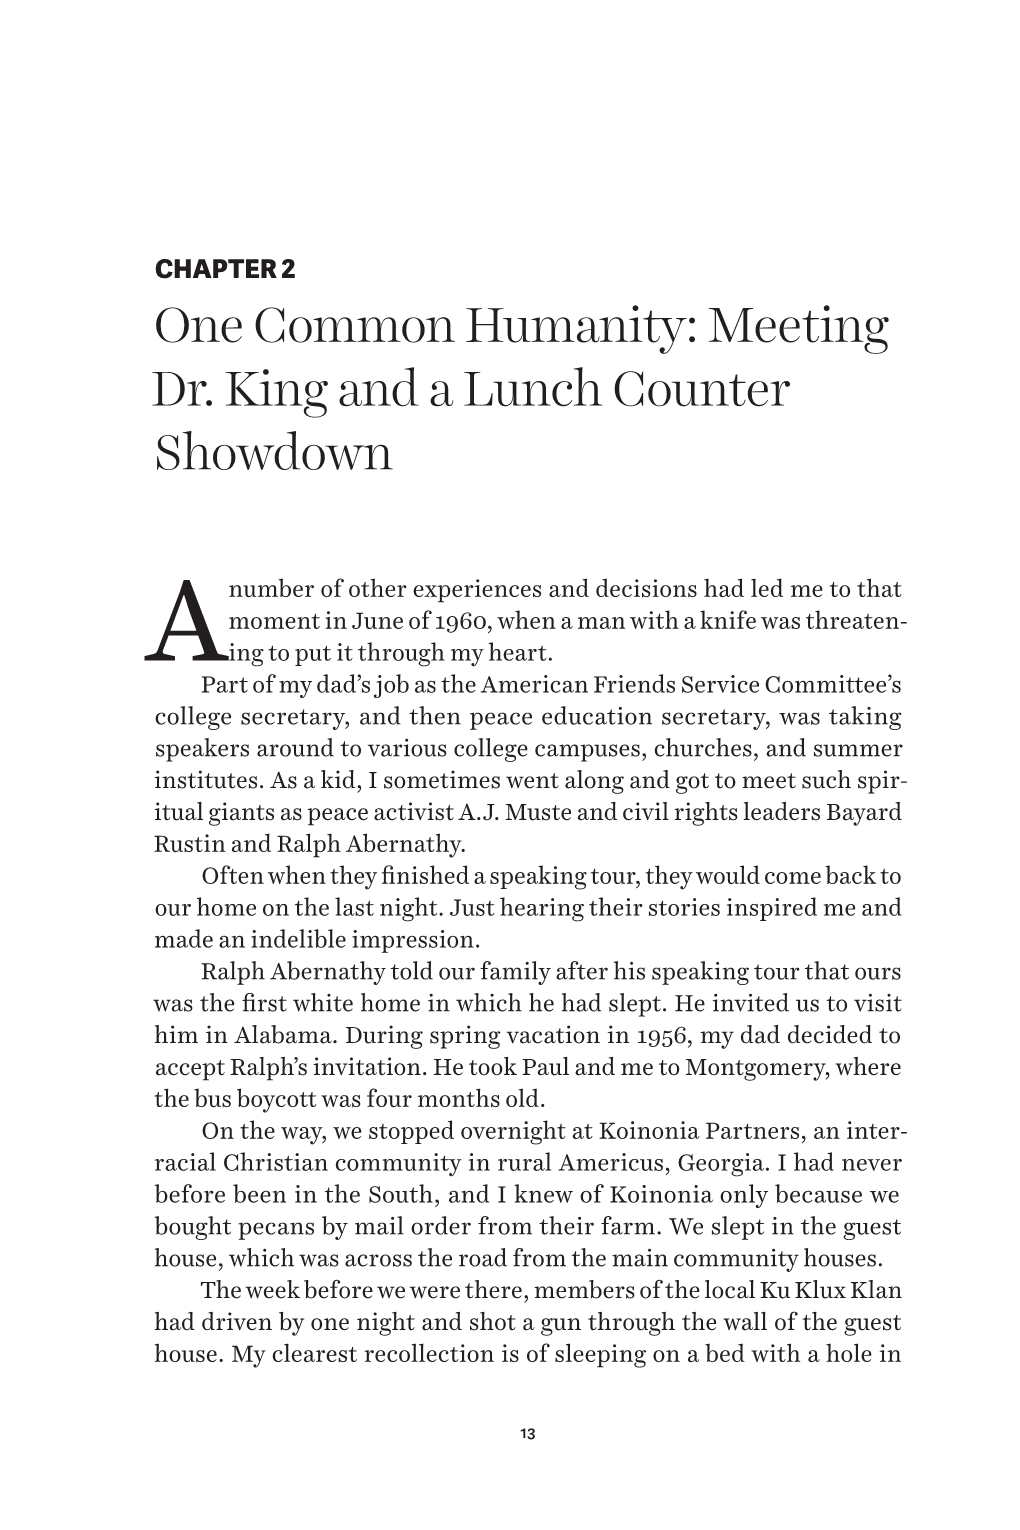 CHAPTER 2: One Common Humanity: Meeting Dr. King and A